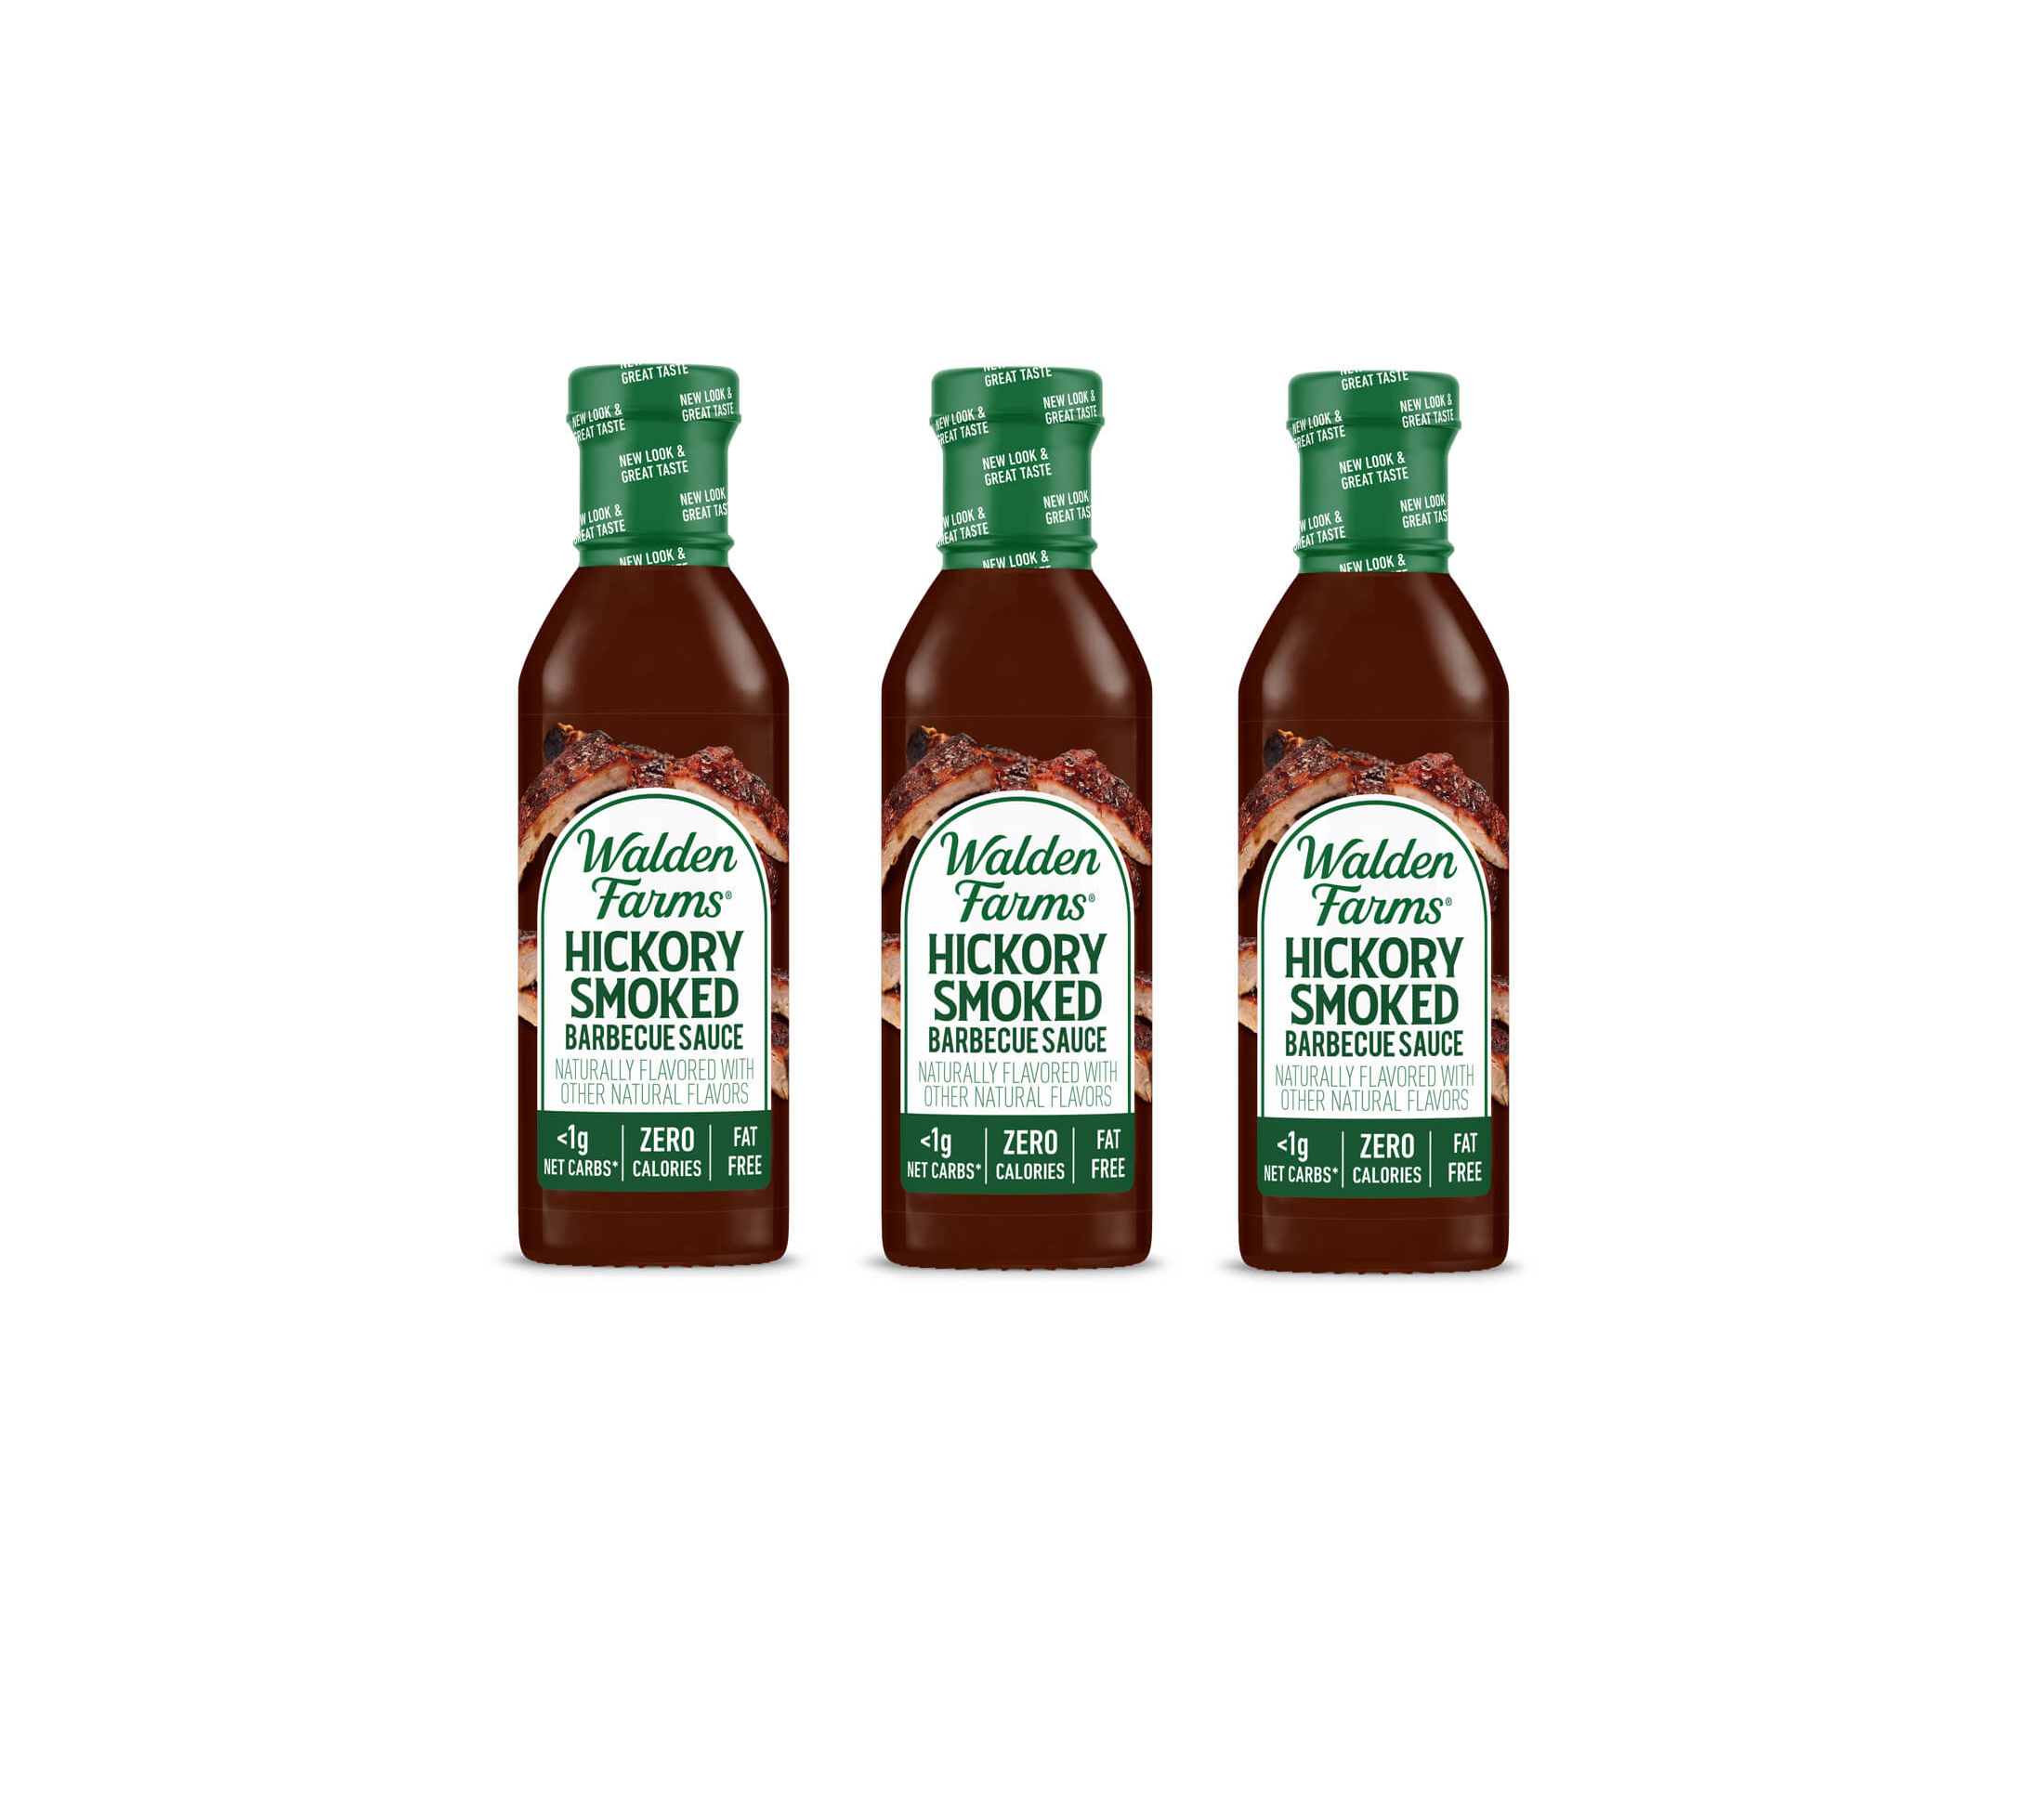 #Flavor_Hickory Smoked #Size_3 Bottles